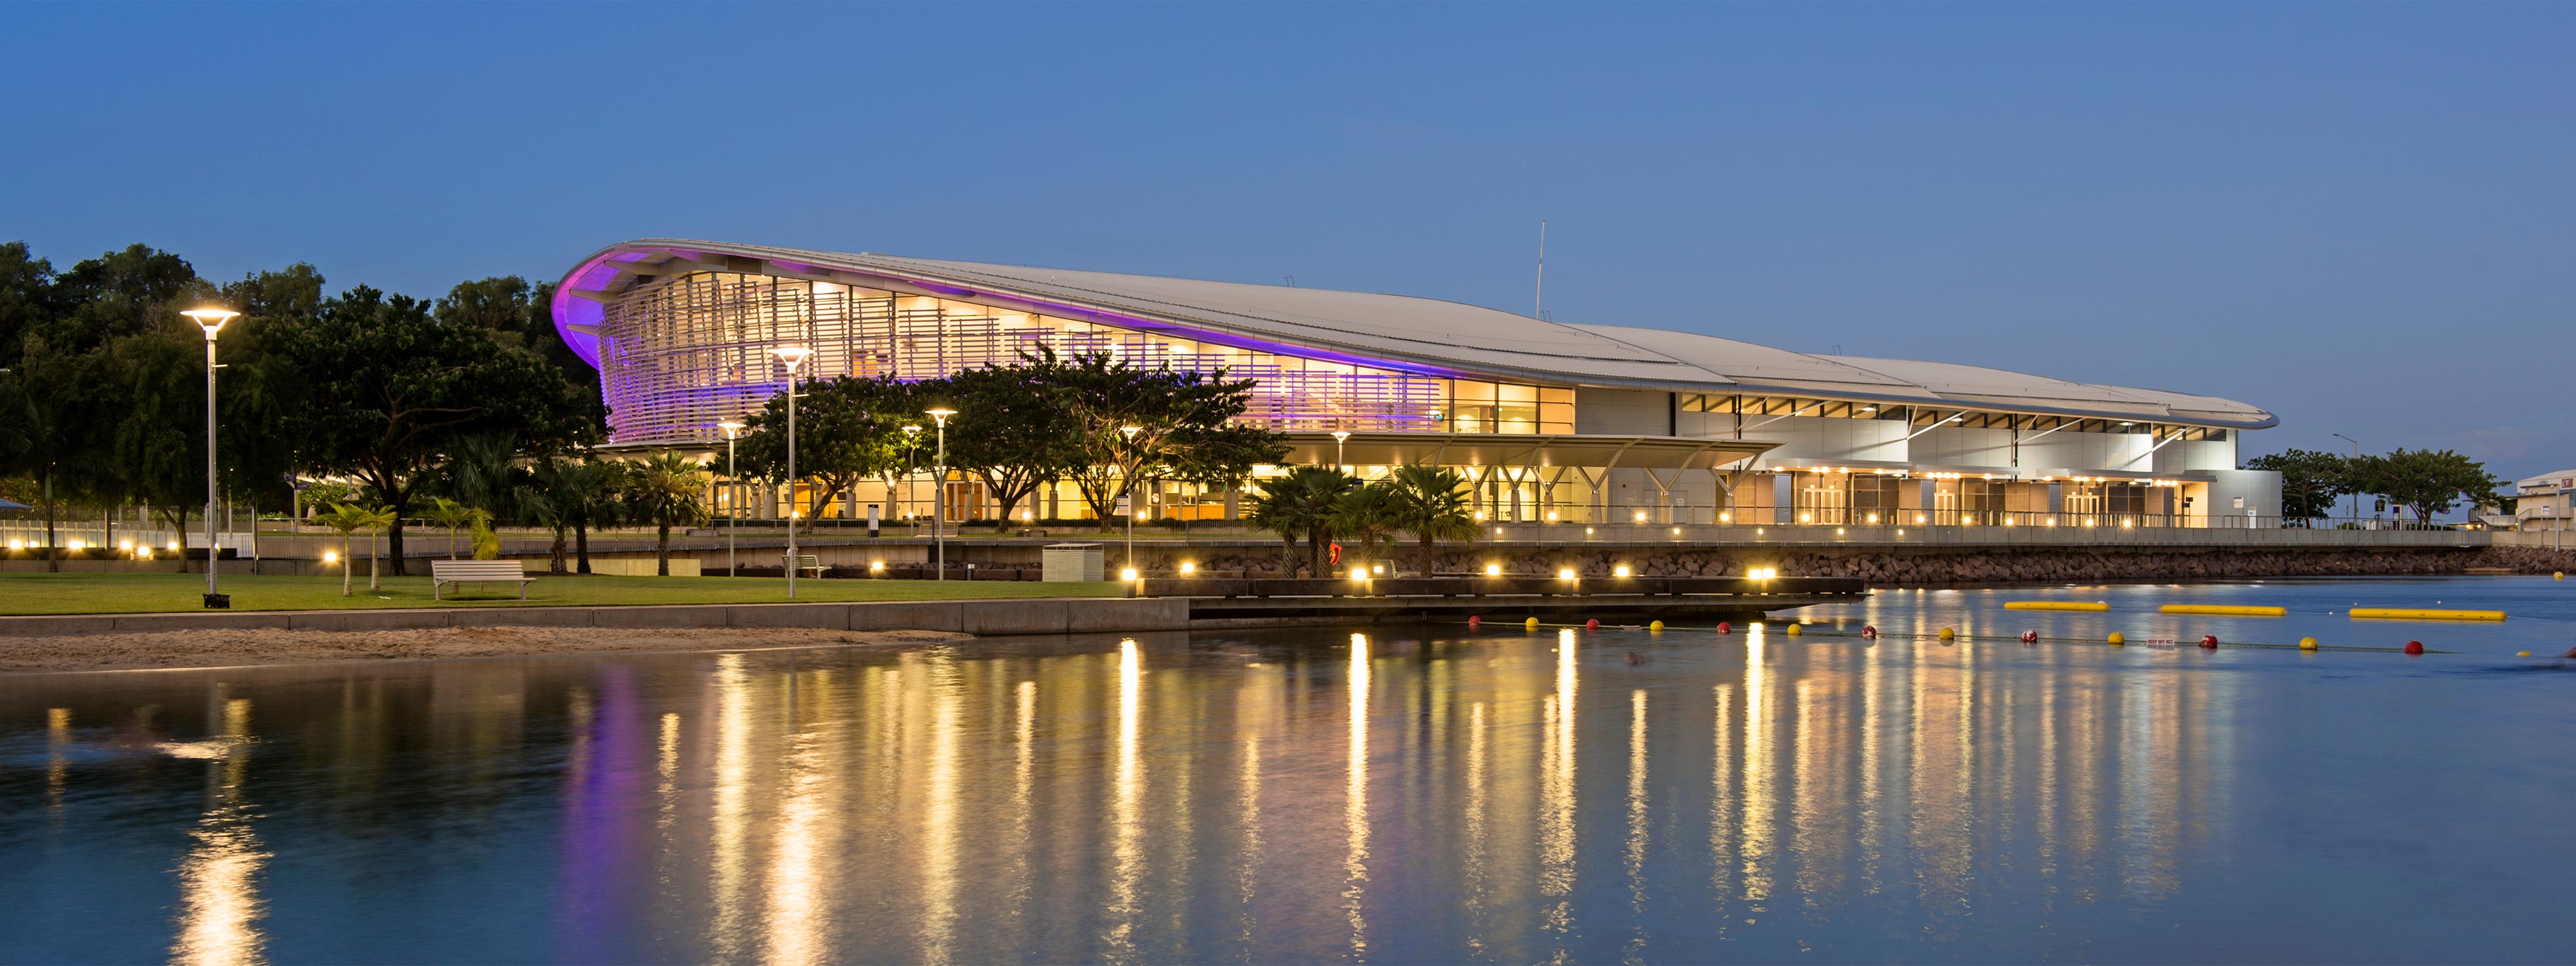 Darwin Convention Centre Business Development team heads to AIME